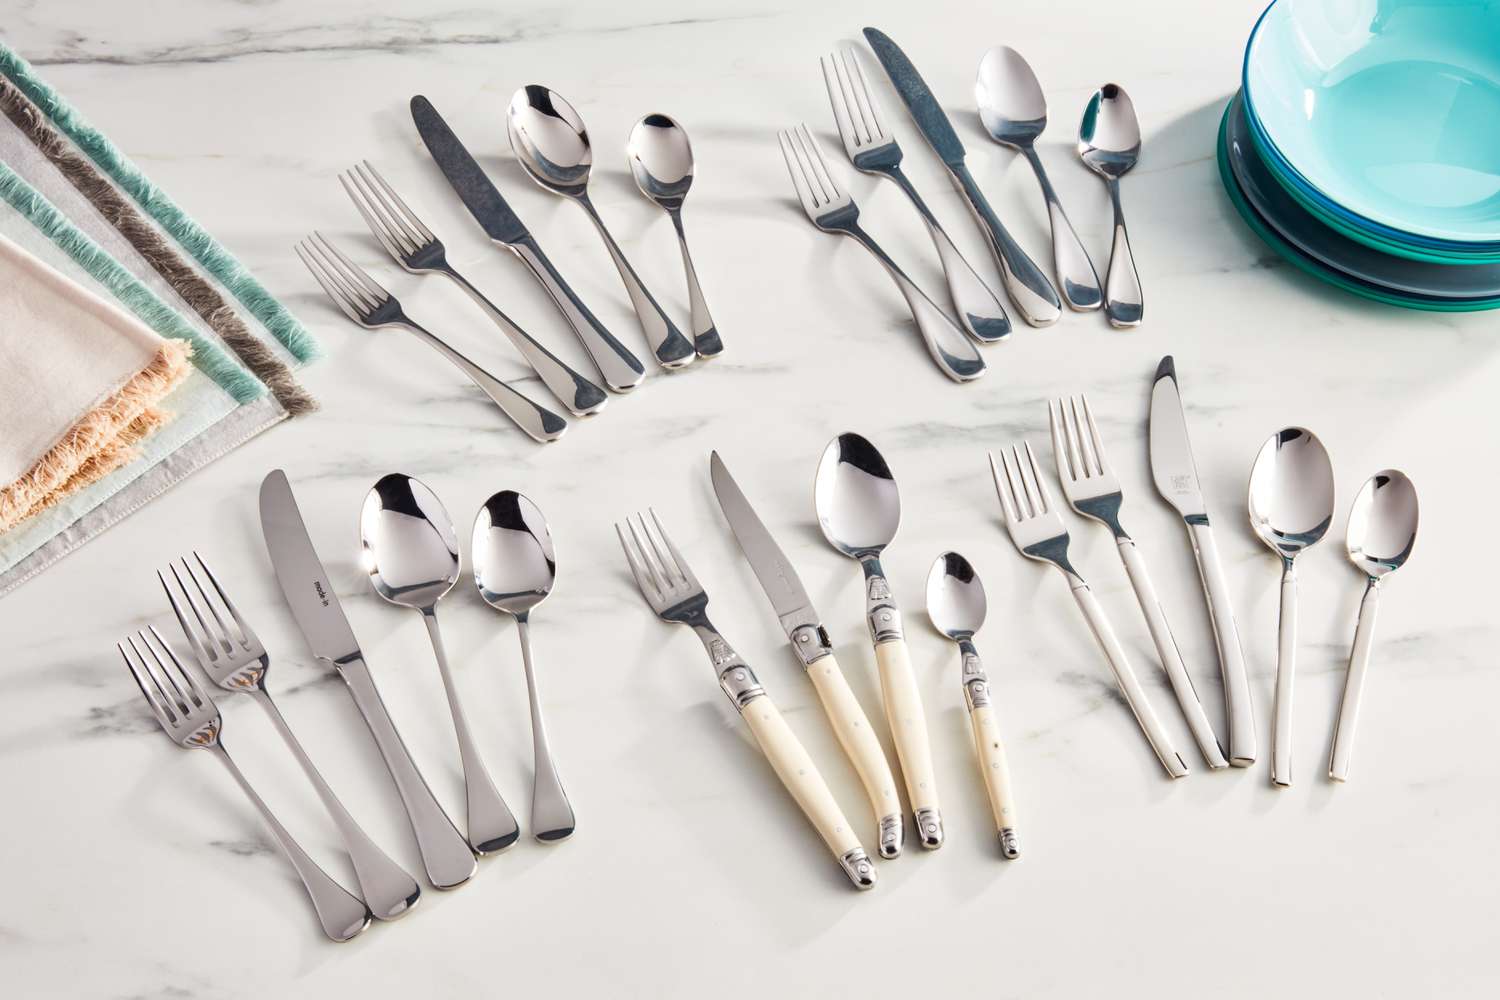 Who Makes The Best Kitchen Cutlery